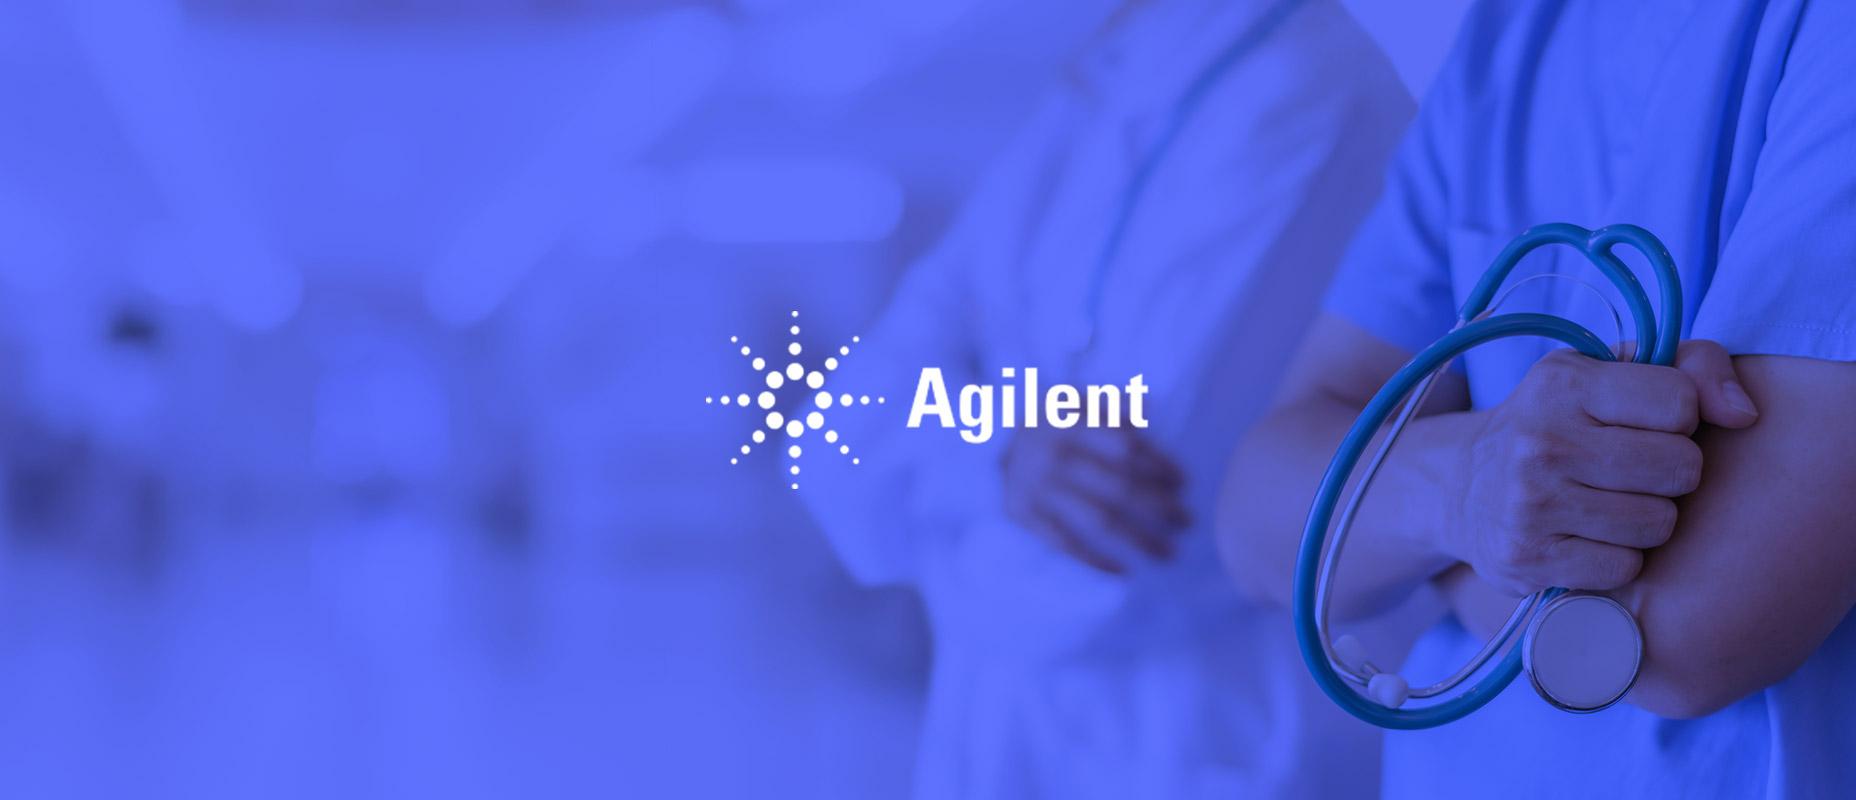 Agilent Technologies To Spend Up to 2 Billion USD on Stock Buybacks